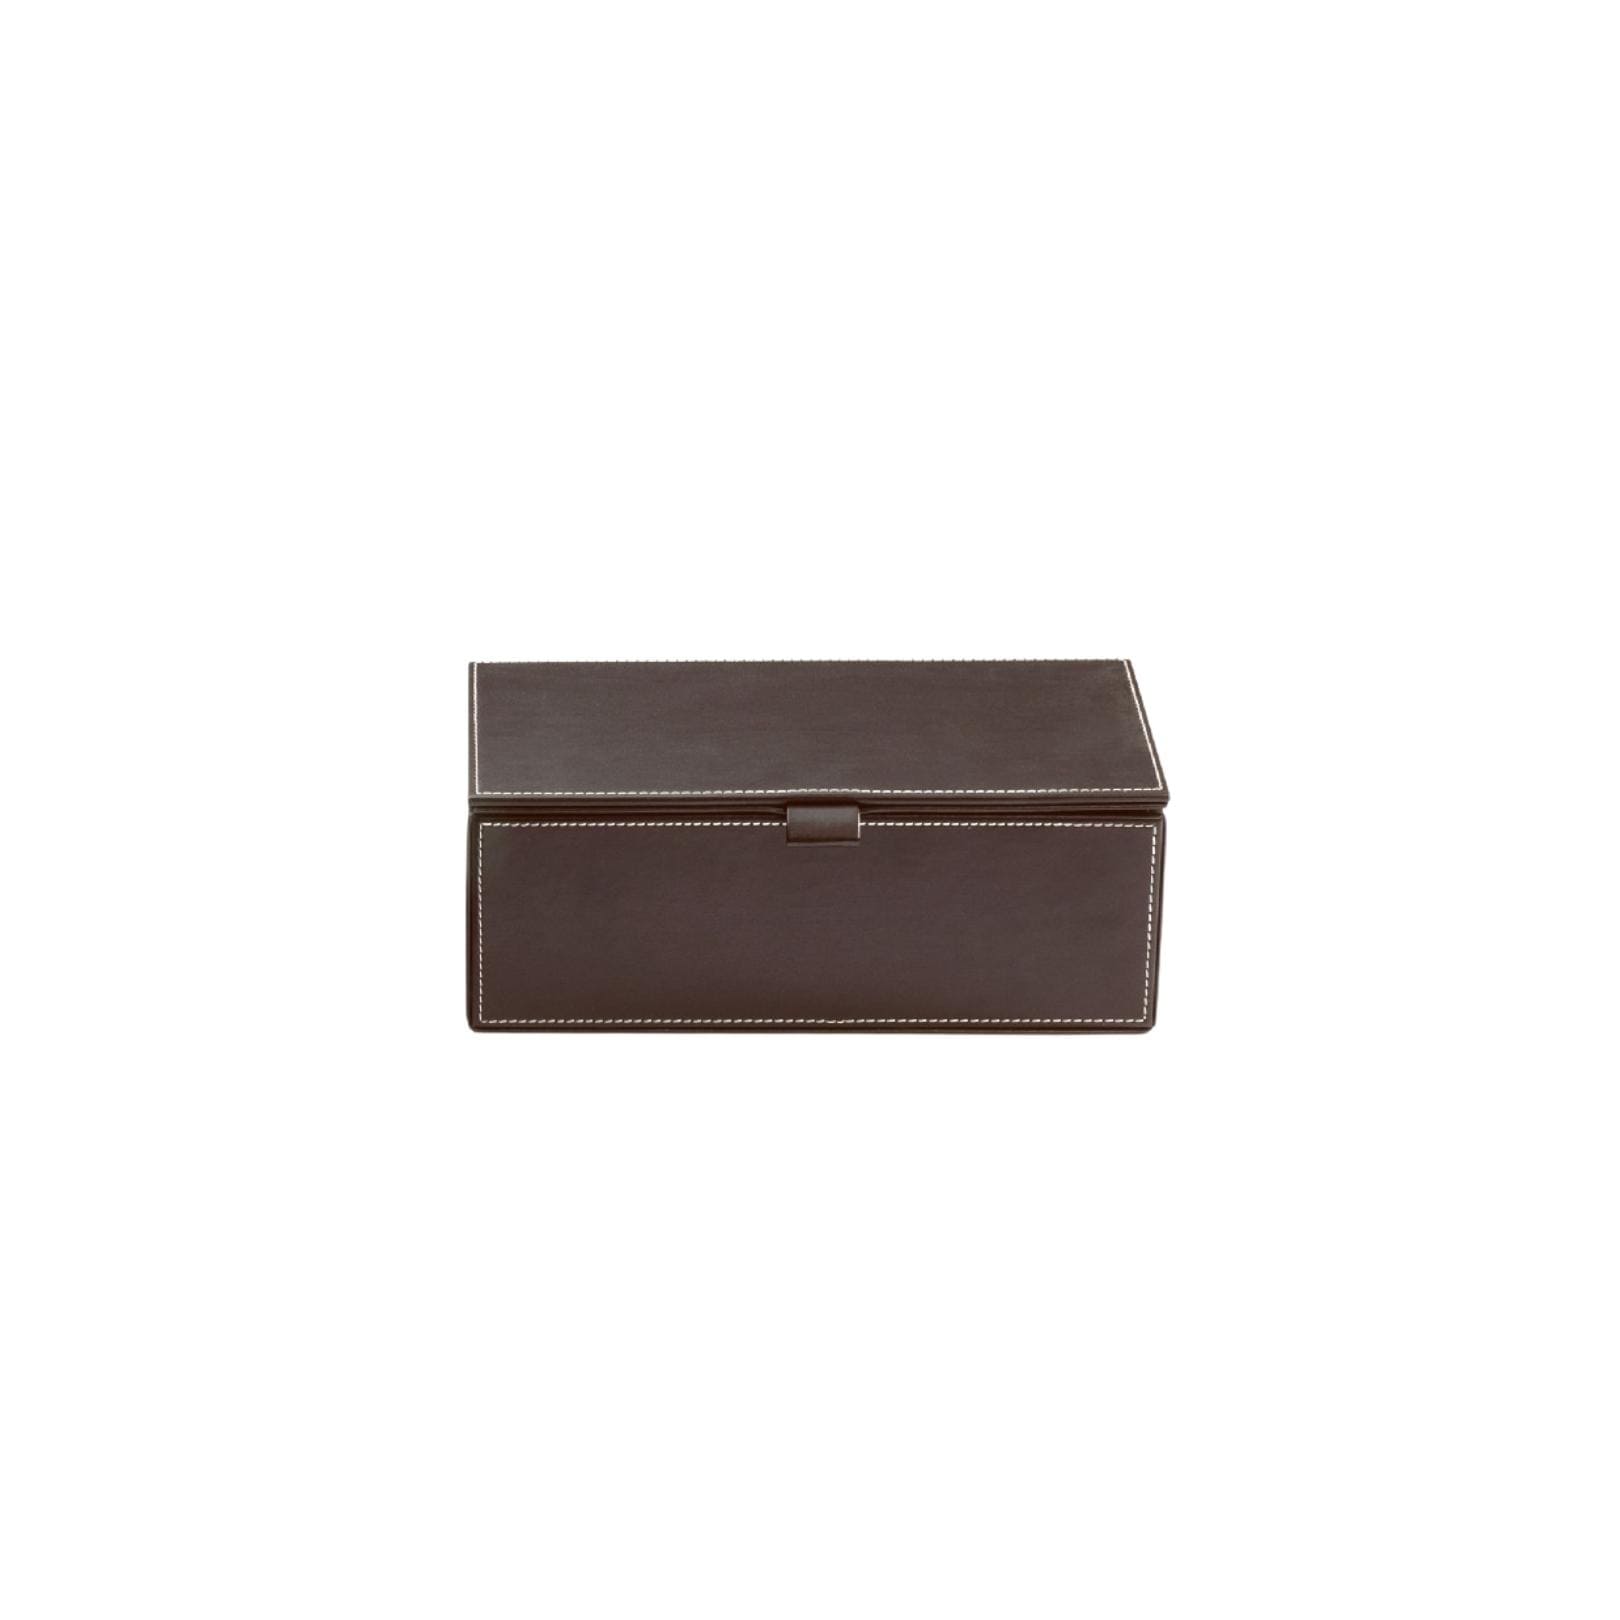 Box big with cover artificial leather dark brown Brownie Decor Walther